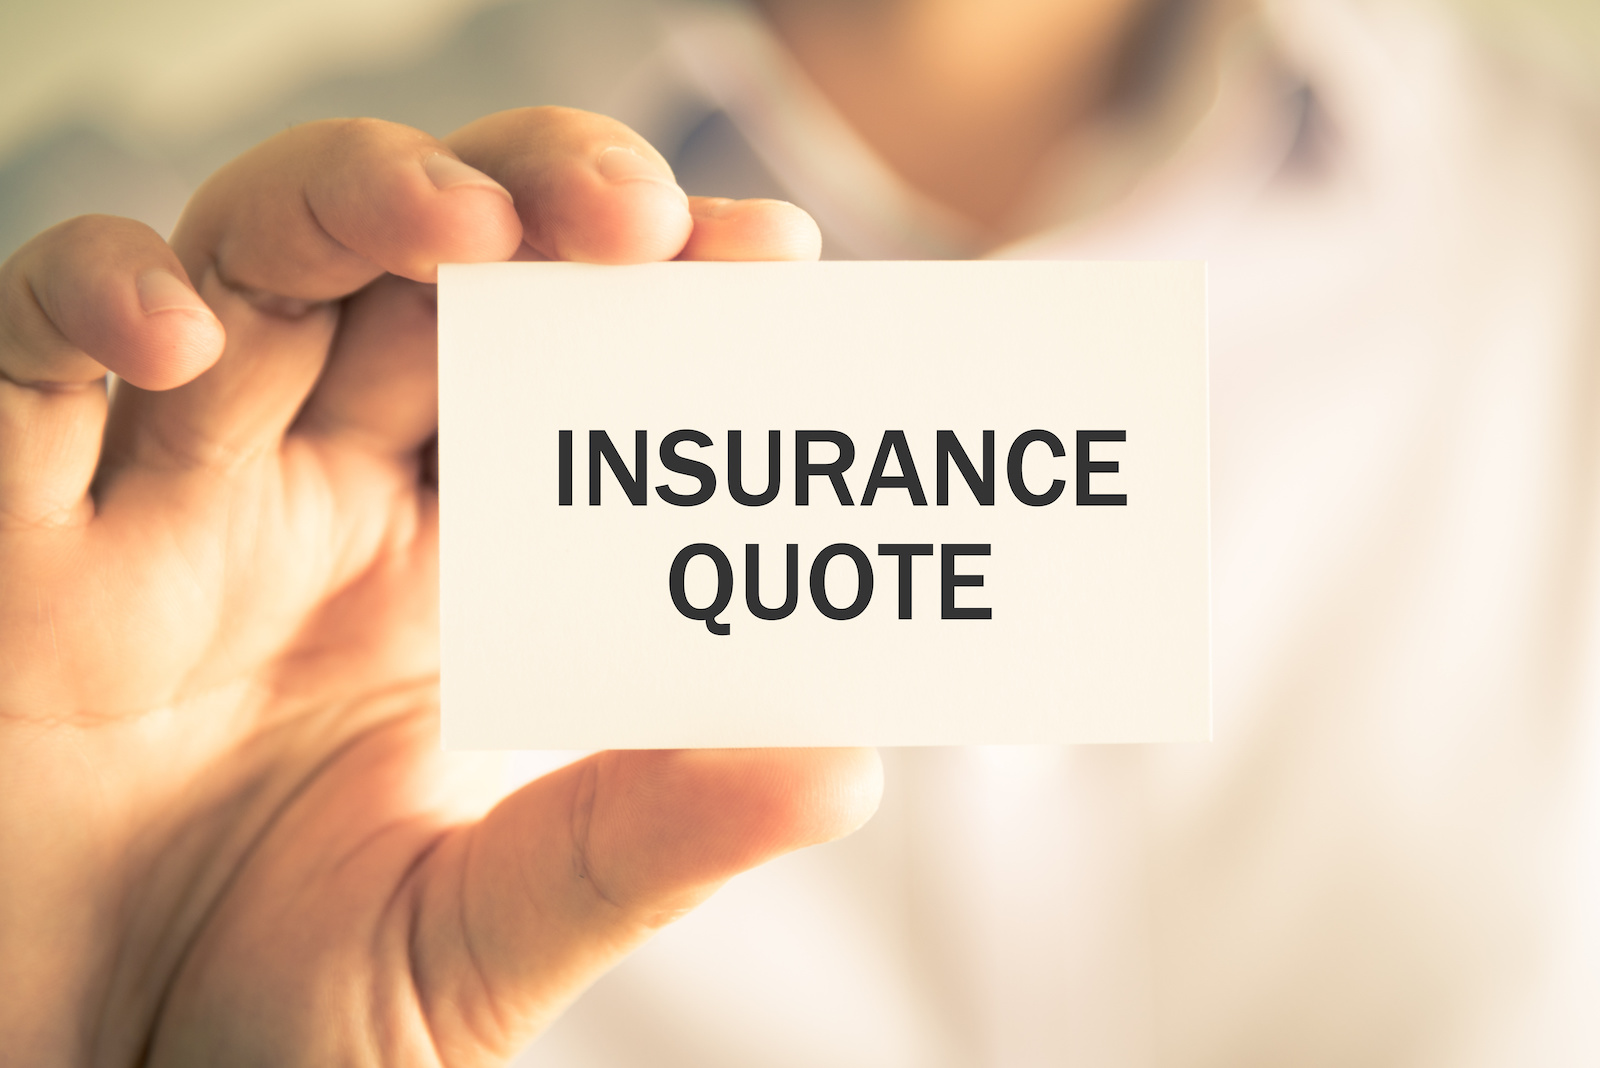 Business Insurance Quotes - Get a free quote now